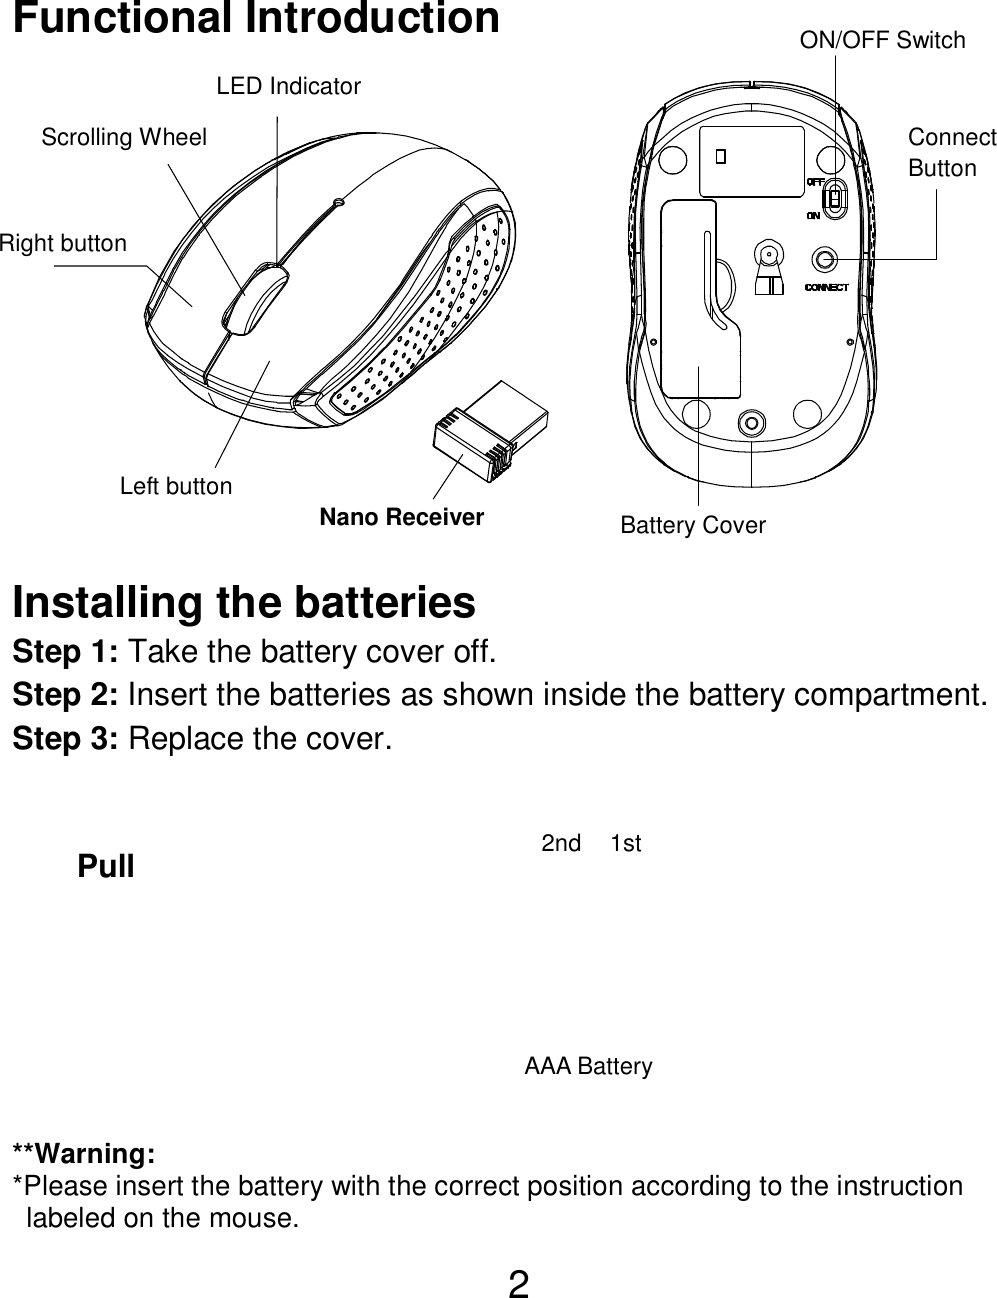  2 Functional Introduction               Installing the batteries Step 1: Take the battery cover off. Step 2: Insert the batteries as shown inside the battery compartment. Step 3: Replace the cover.           **Warning: *Please insert the battery with the correct position according to the instruction       labeled on the mouse. AAA Battery Left button Right button  Battery Cover Scrolling Wheel  Connect   Button   ON/OFF Switch Nano Receiver LED Indicator Pull 1st 2nd 